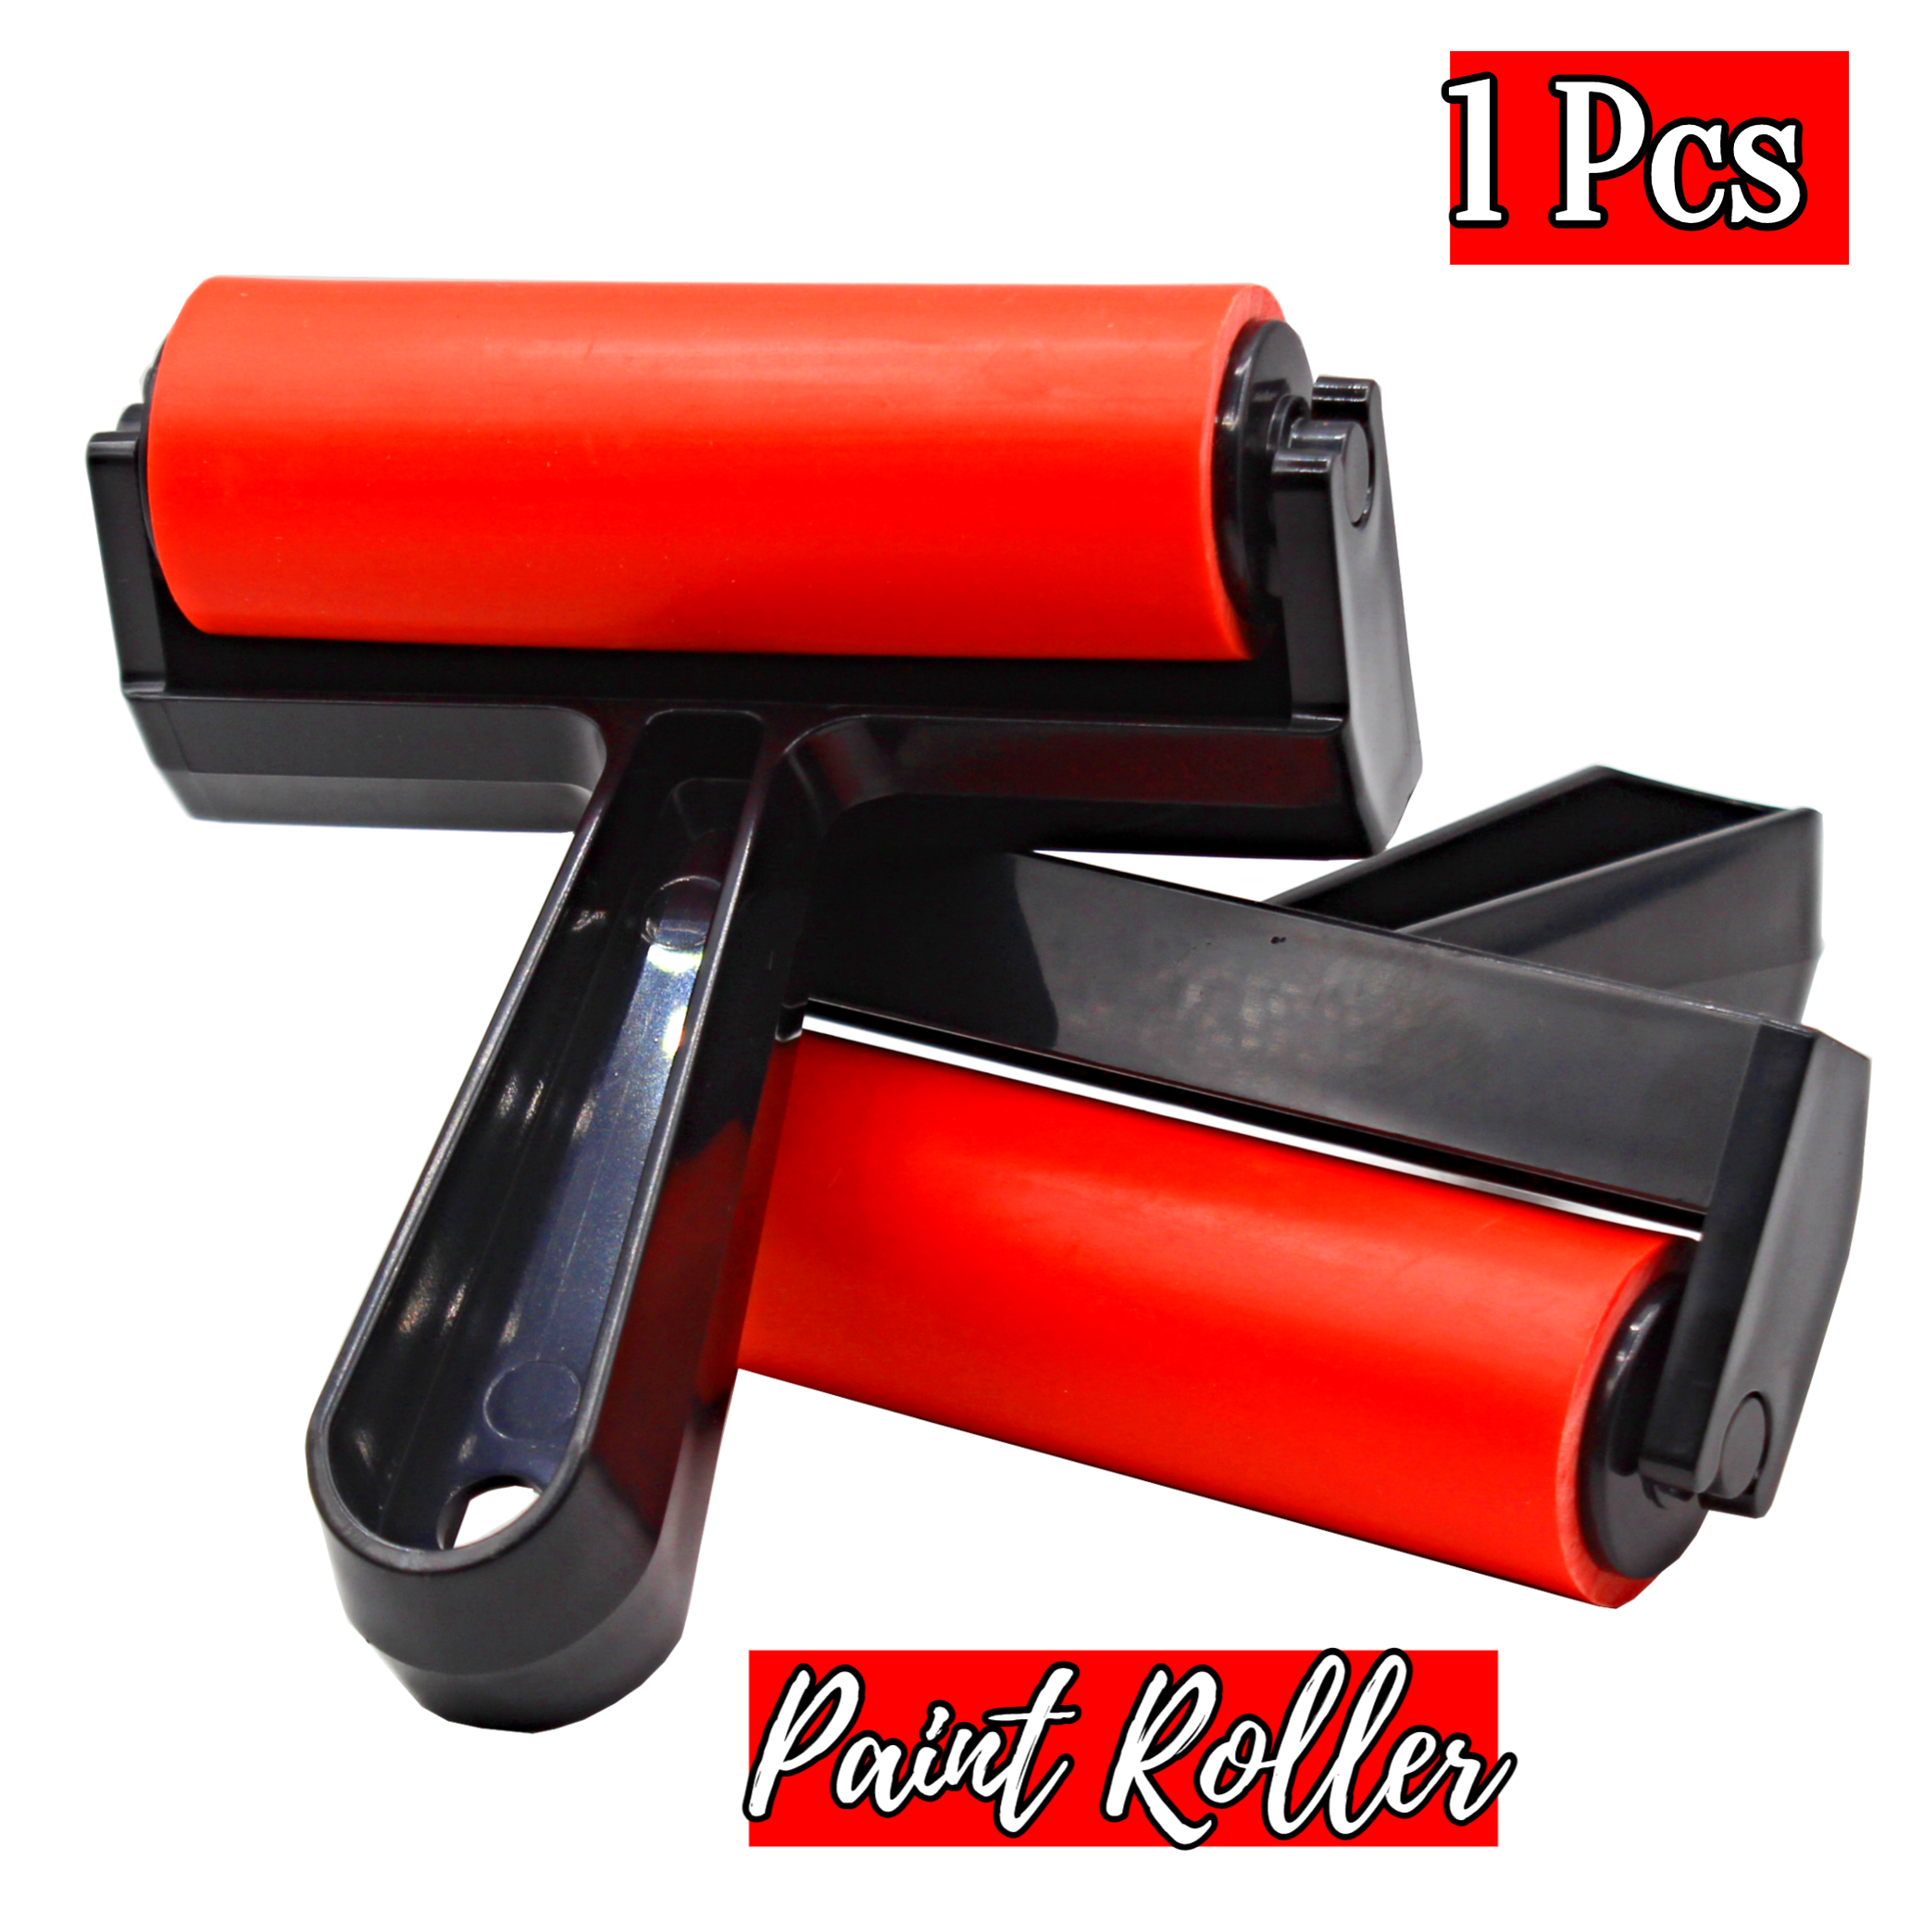 BANLTRE Rubber Brayer Roller for Printmaking, Ideal for Anti Skid Tape Construction Tools, Print,Craft Stamping Brayers for Wallpapers and Scrapbooks